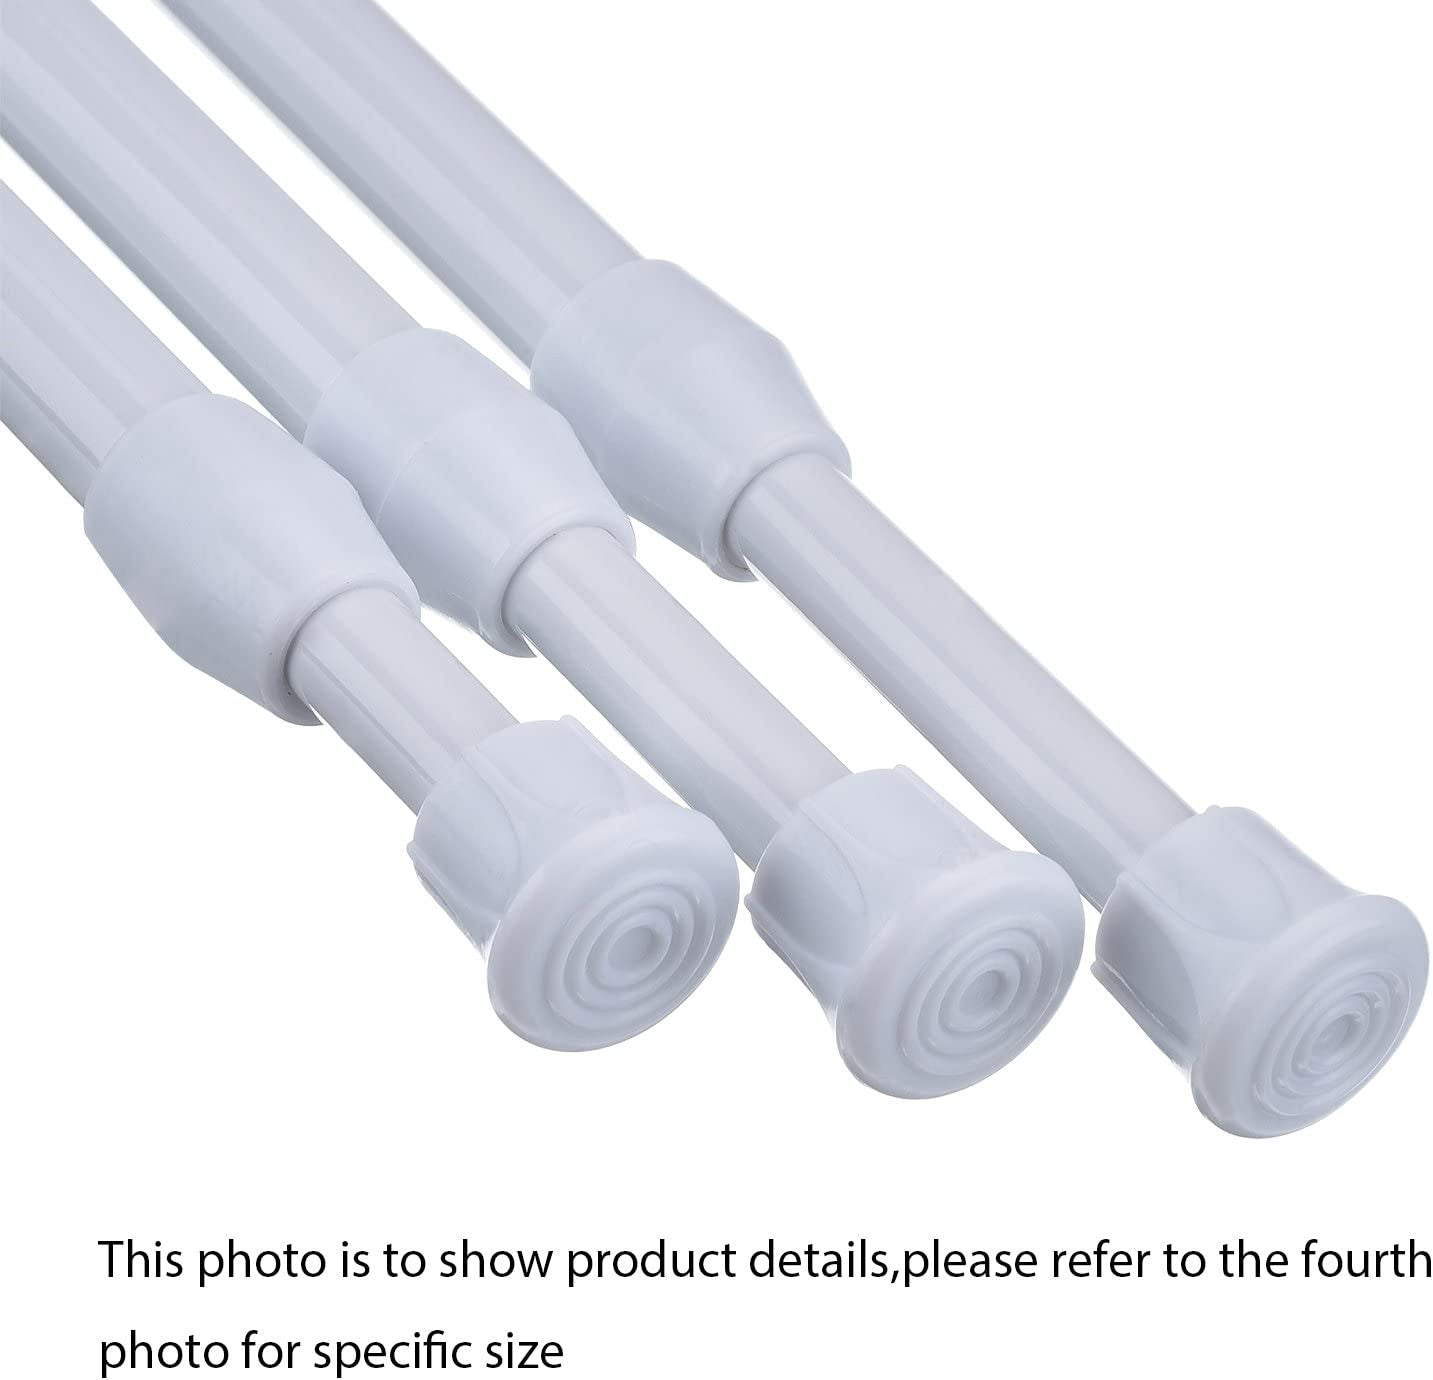 3 Pack Tension Curtain Rod Spring Loaded Curtain Rods Cupboard Bars Window Tensions Rod, Non Slip Shower Rod, Stainless Steel, Adjustable Width (9.84-15.75 Inches, White)